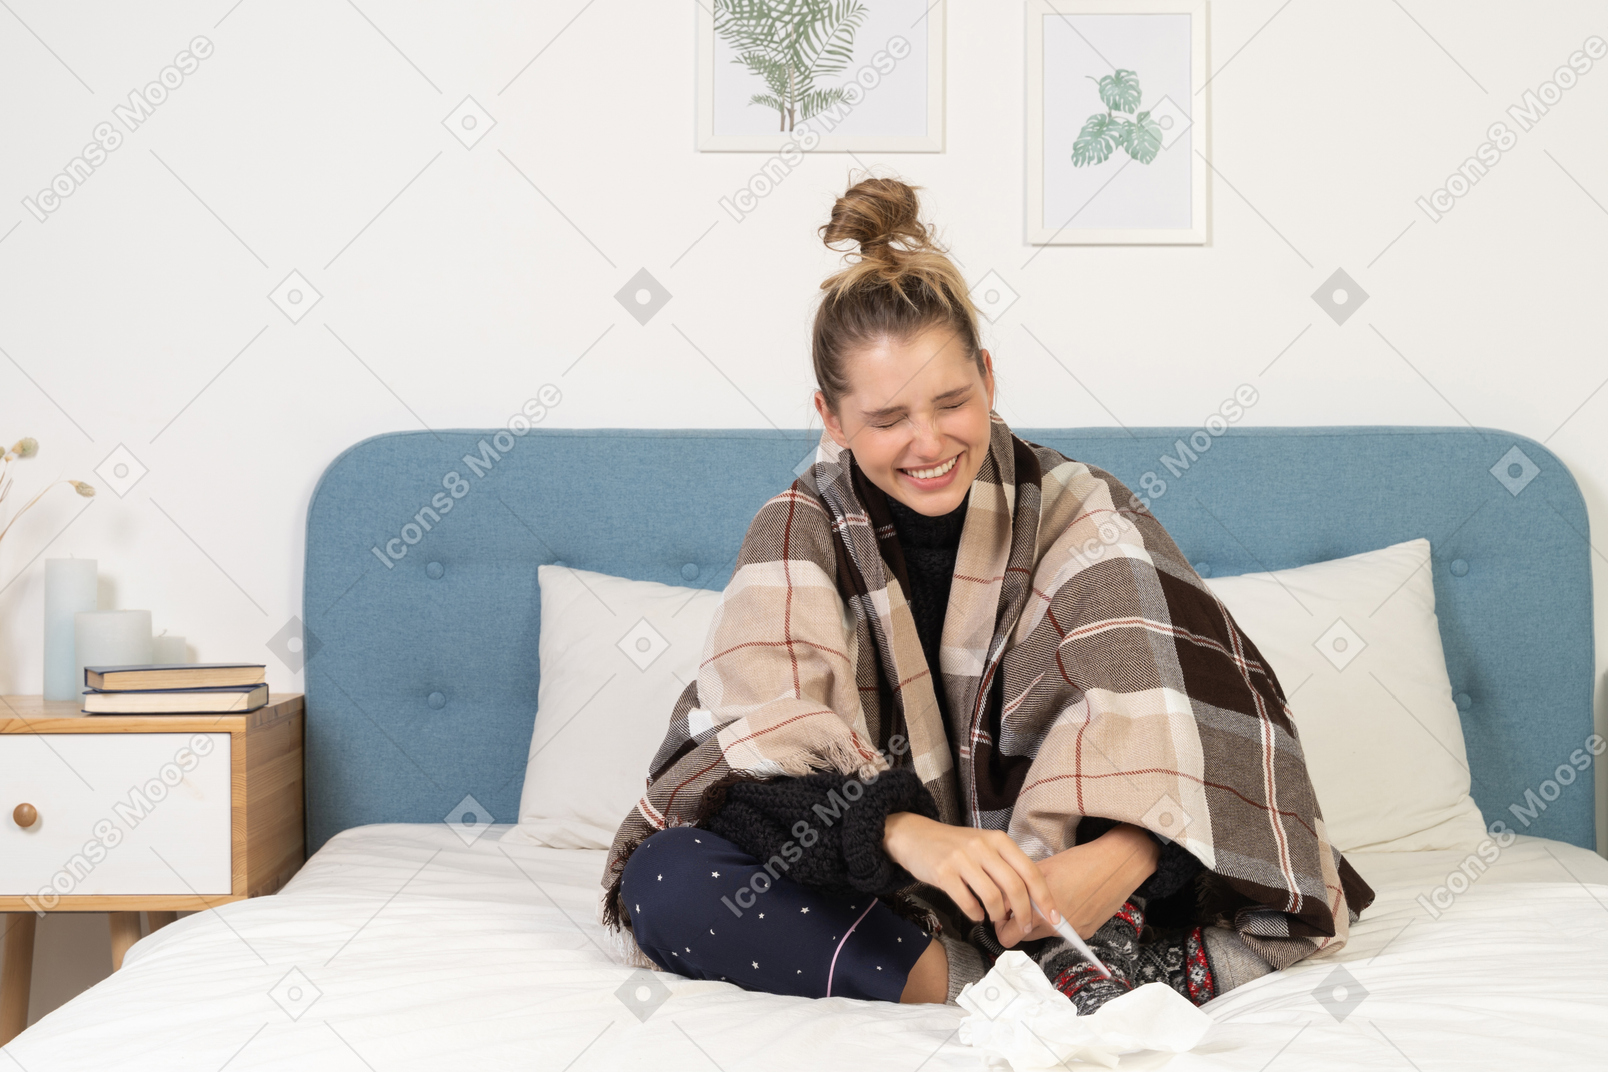 Front view of a laughing ill young lady in pajamas wrapped in checked blanket with thermometer